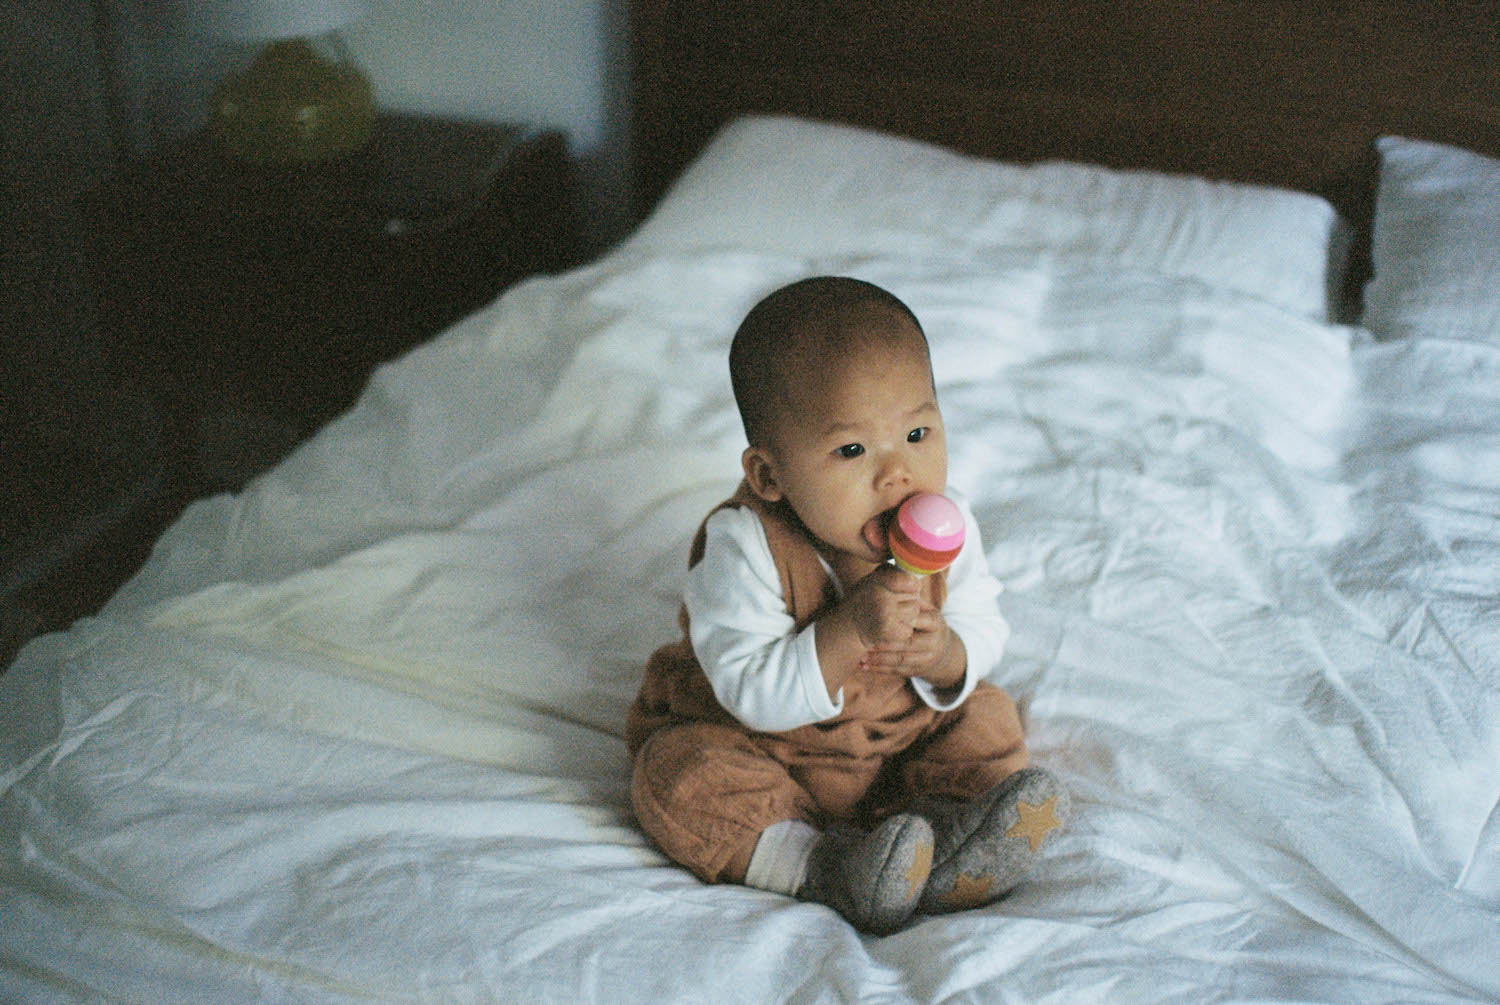 Baby Alexa as photographed during an analogue lifestyle family portrait session in Western Australia.